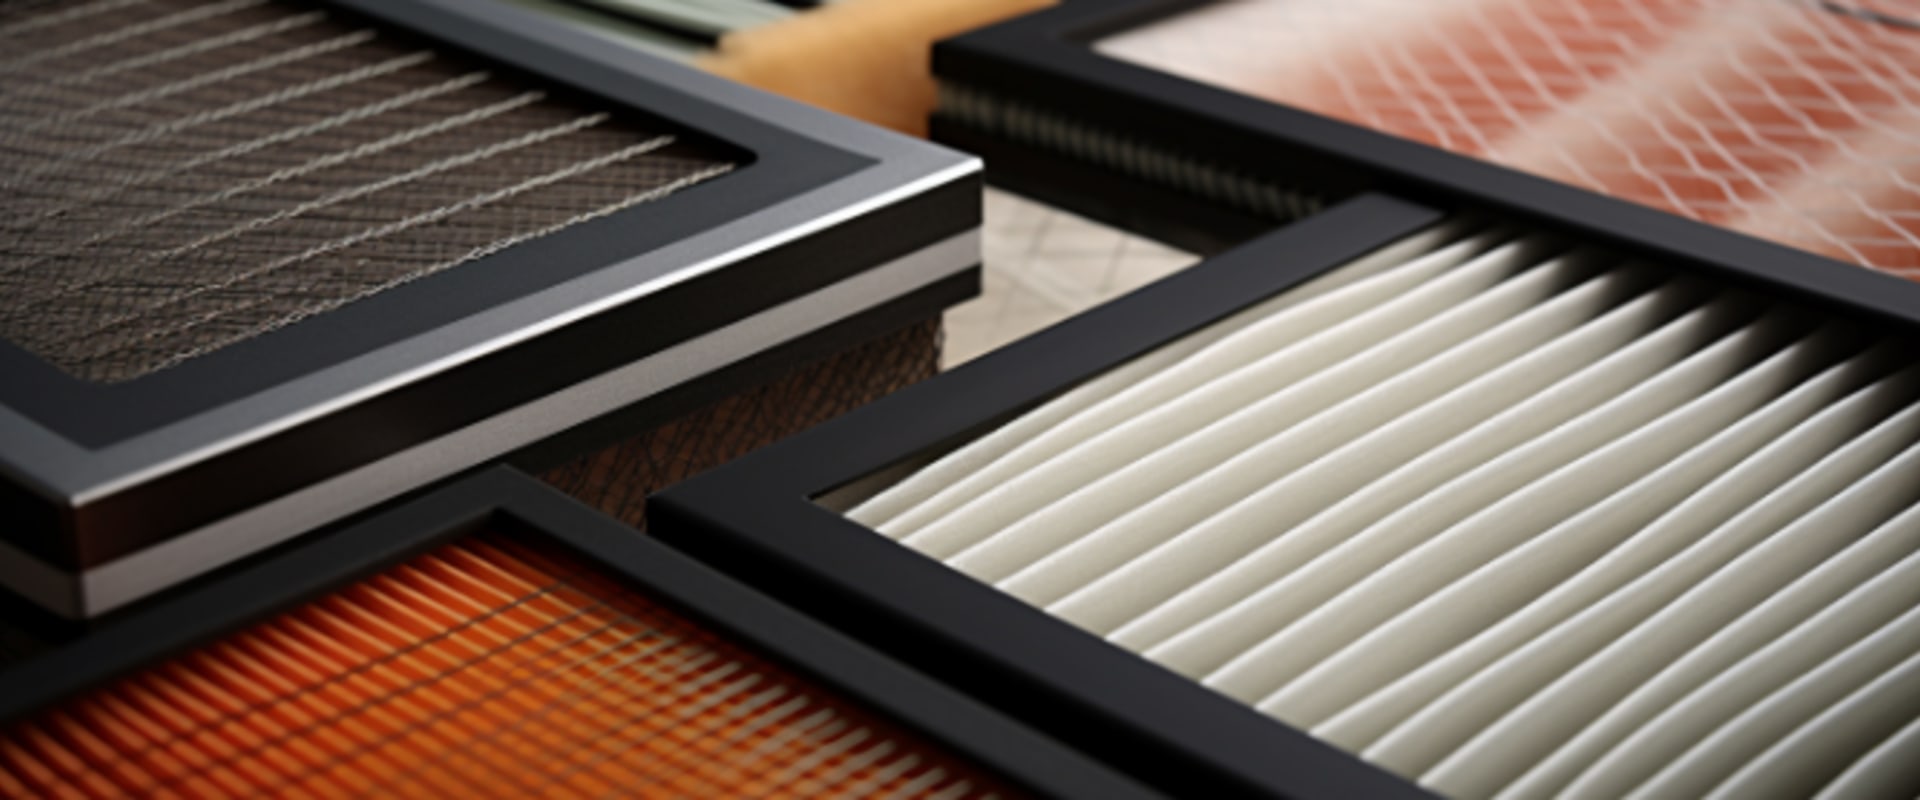 Guideline on How Often Should You Change Your Furnace Filter